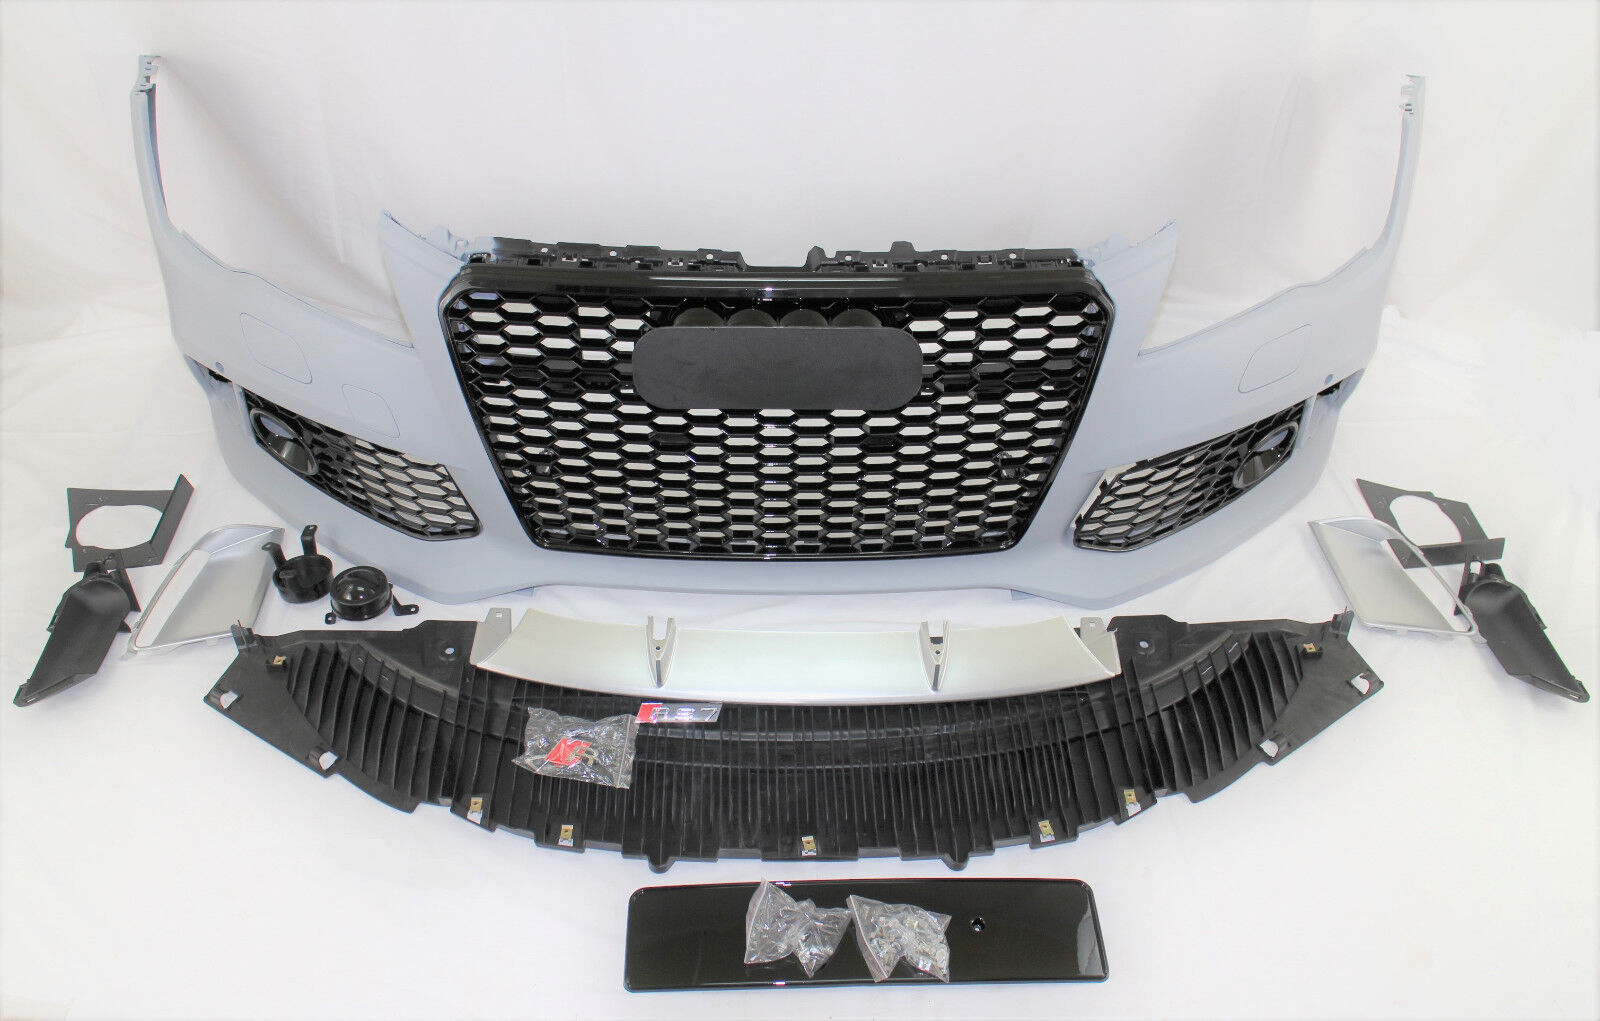  RS7 style front bumper cover  grille lower spoiler set fits 2012-15 A7 S7 C7.0